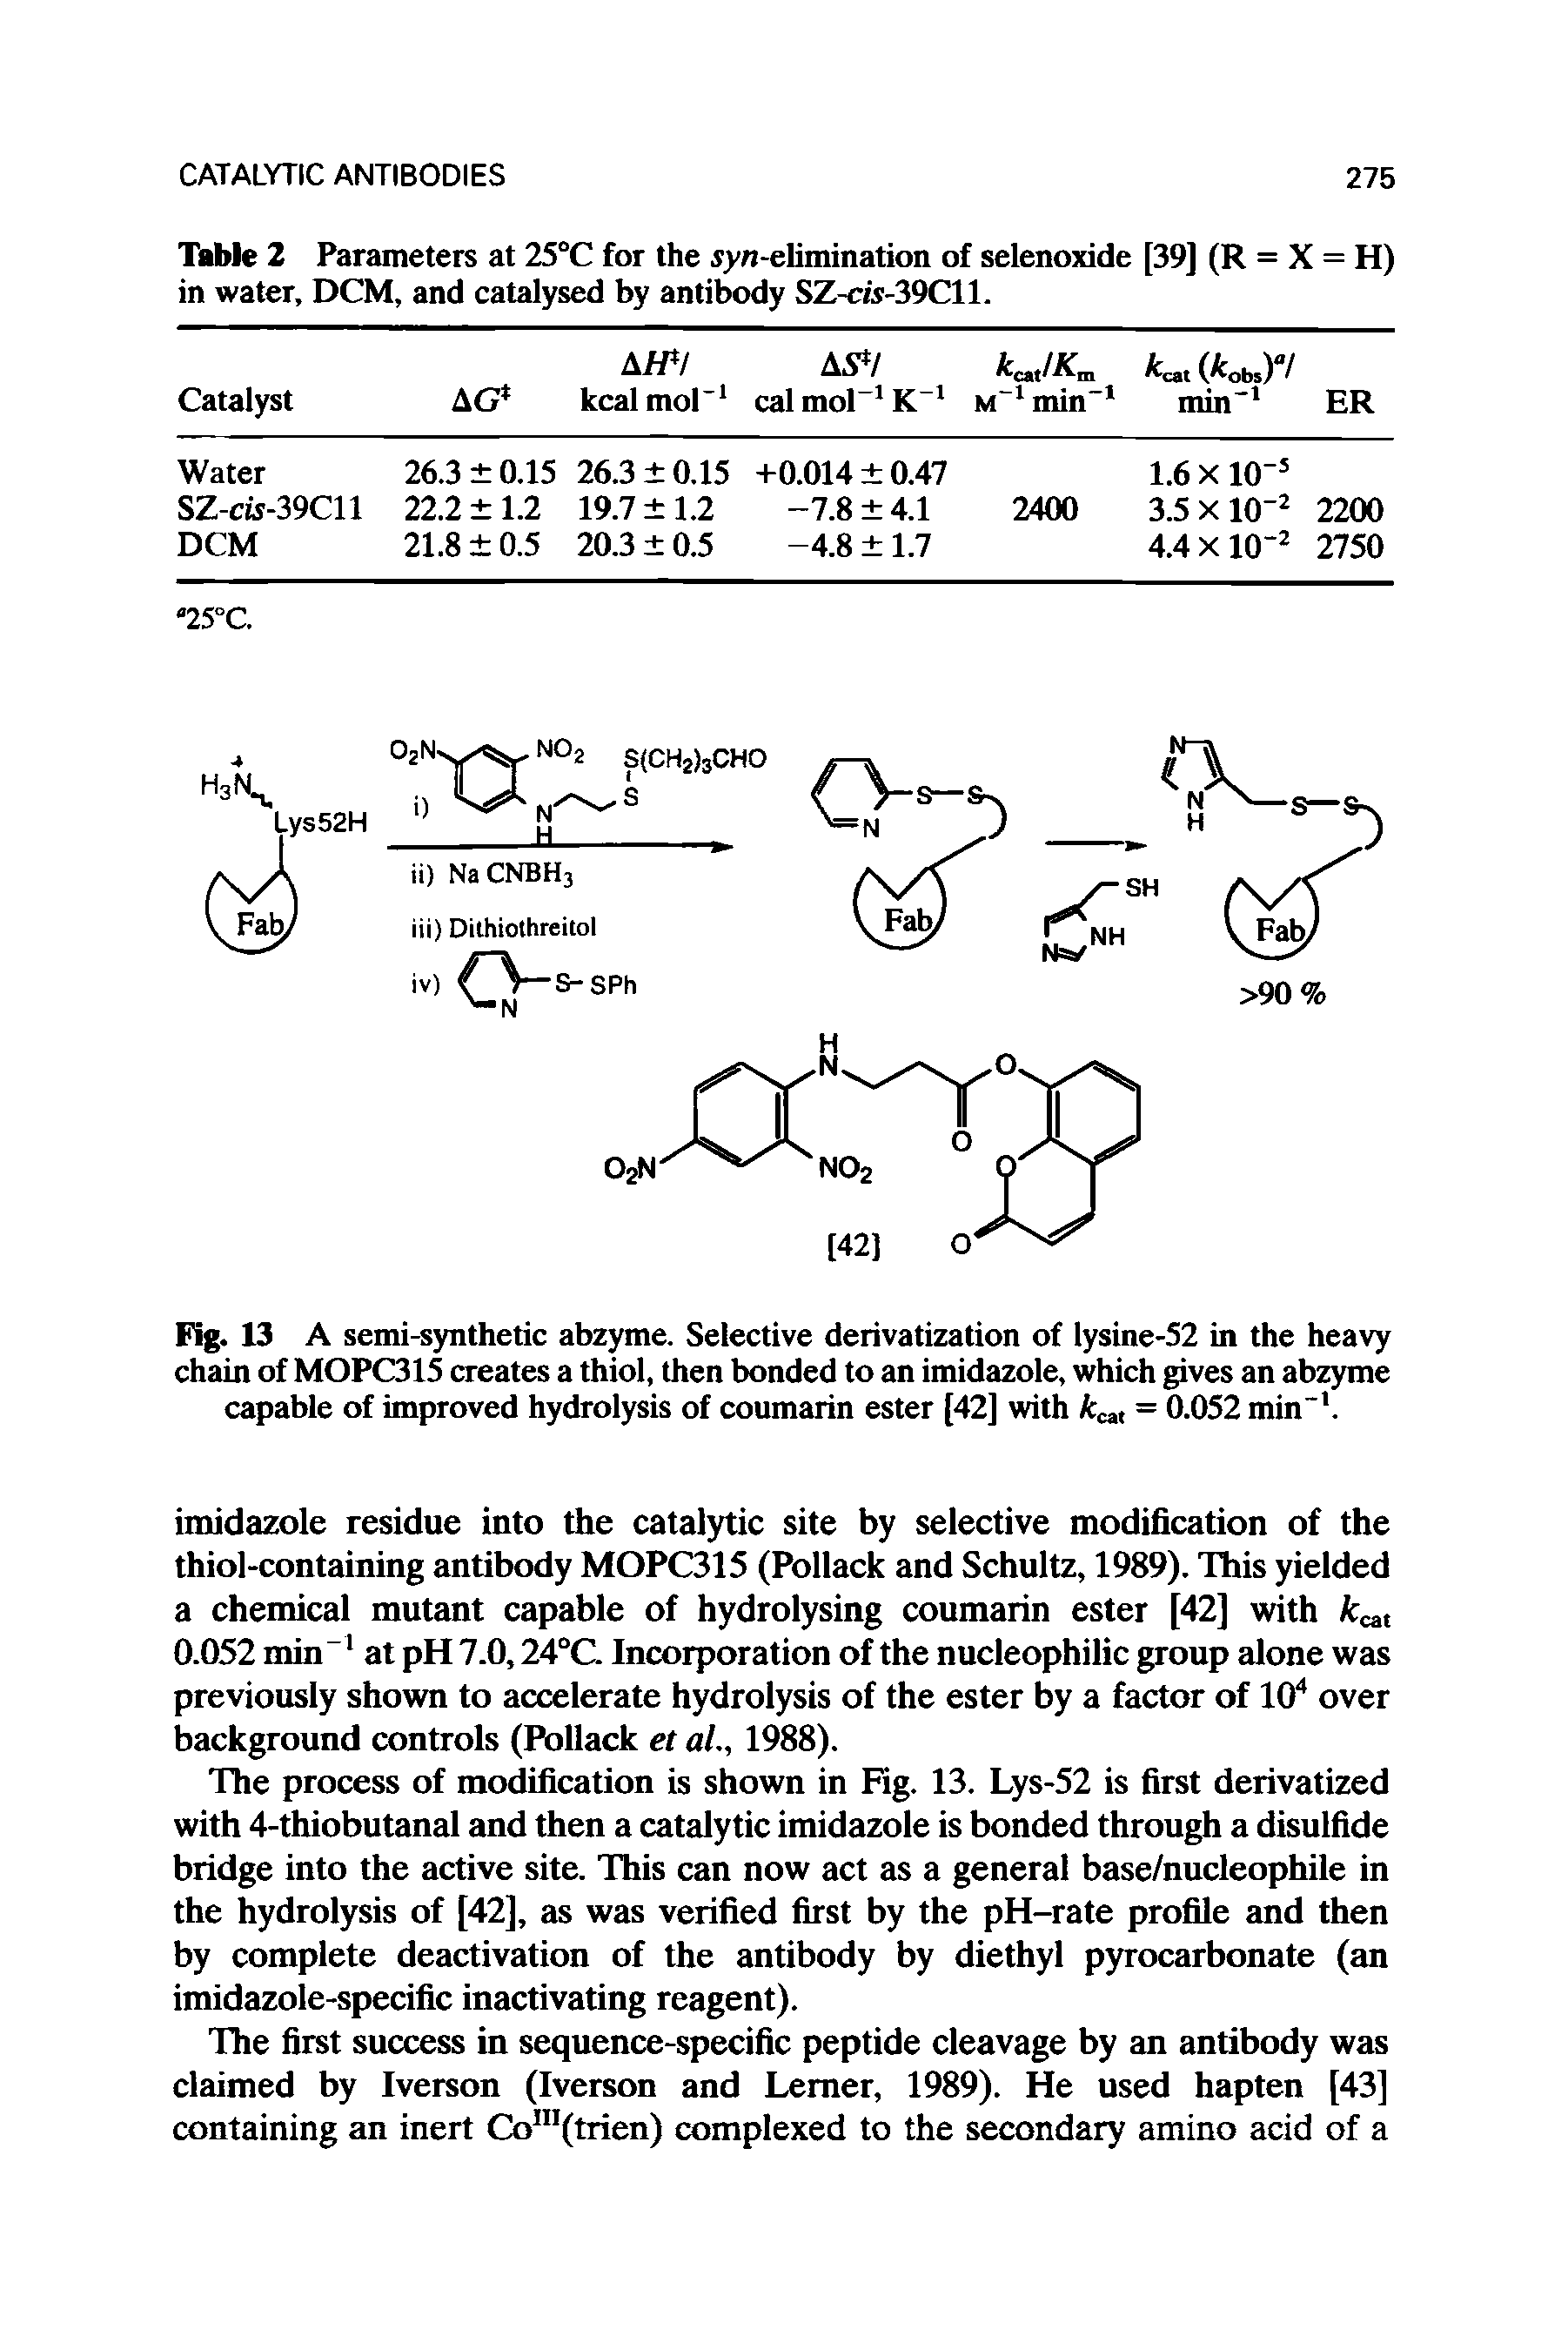 Fig. 13 A semi-synthetic abzyme. Selective derivatization of lysine-52 in the heavy chain of MOPC315 creates a thiol, then bonded to an imidazole, which gives an abzyme capable of improved hydrolysis of coumarin ester [42] with ca, = 0.052 min-1.